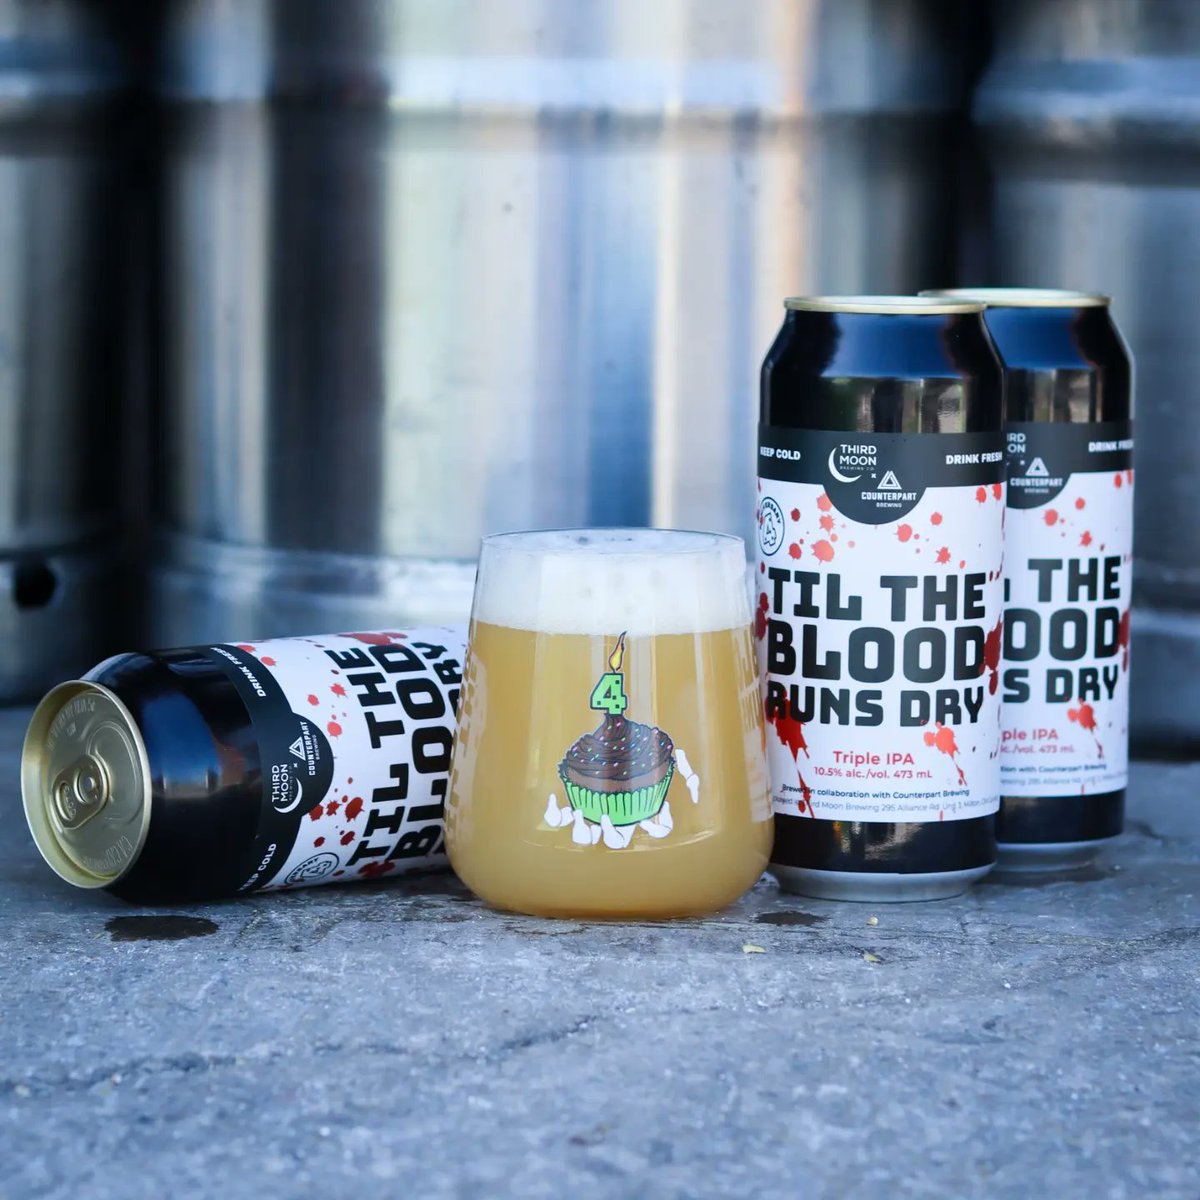 Anniversary beer #4 Next up for our 4th anniversary, we have a collaboration with our good friends Counterpart Brewing - Til The Blood Runs Dry See our Instagram for full details 🍻